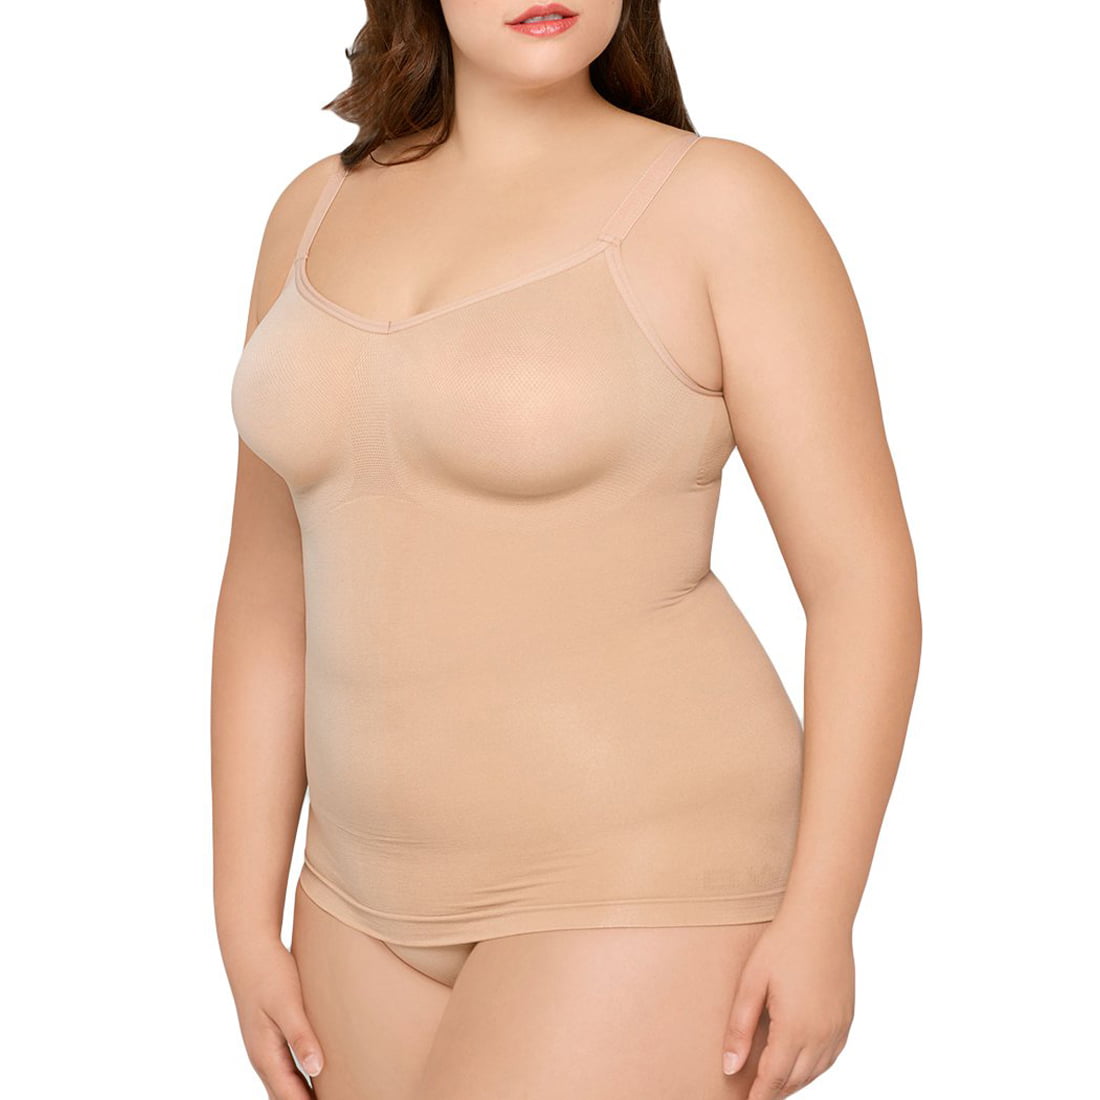 Women's Camisole Shaper Tank Top with Built in Removable Padded Bra  Seamless Tummy Control Shapewear